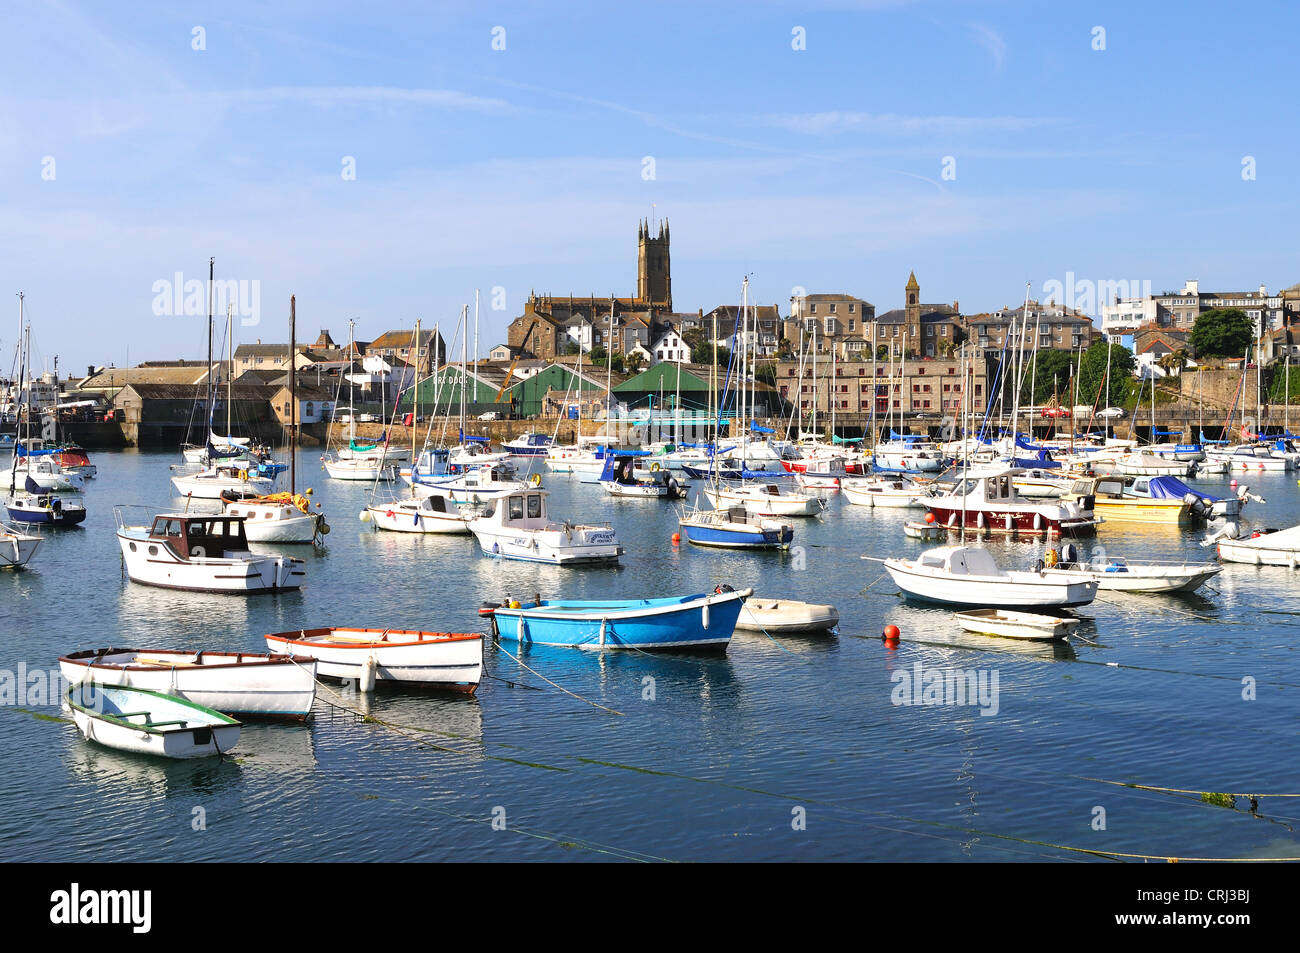 Boats in the harbour at high tide, Penzance, Cornwall, UK Stock Photo